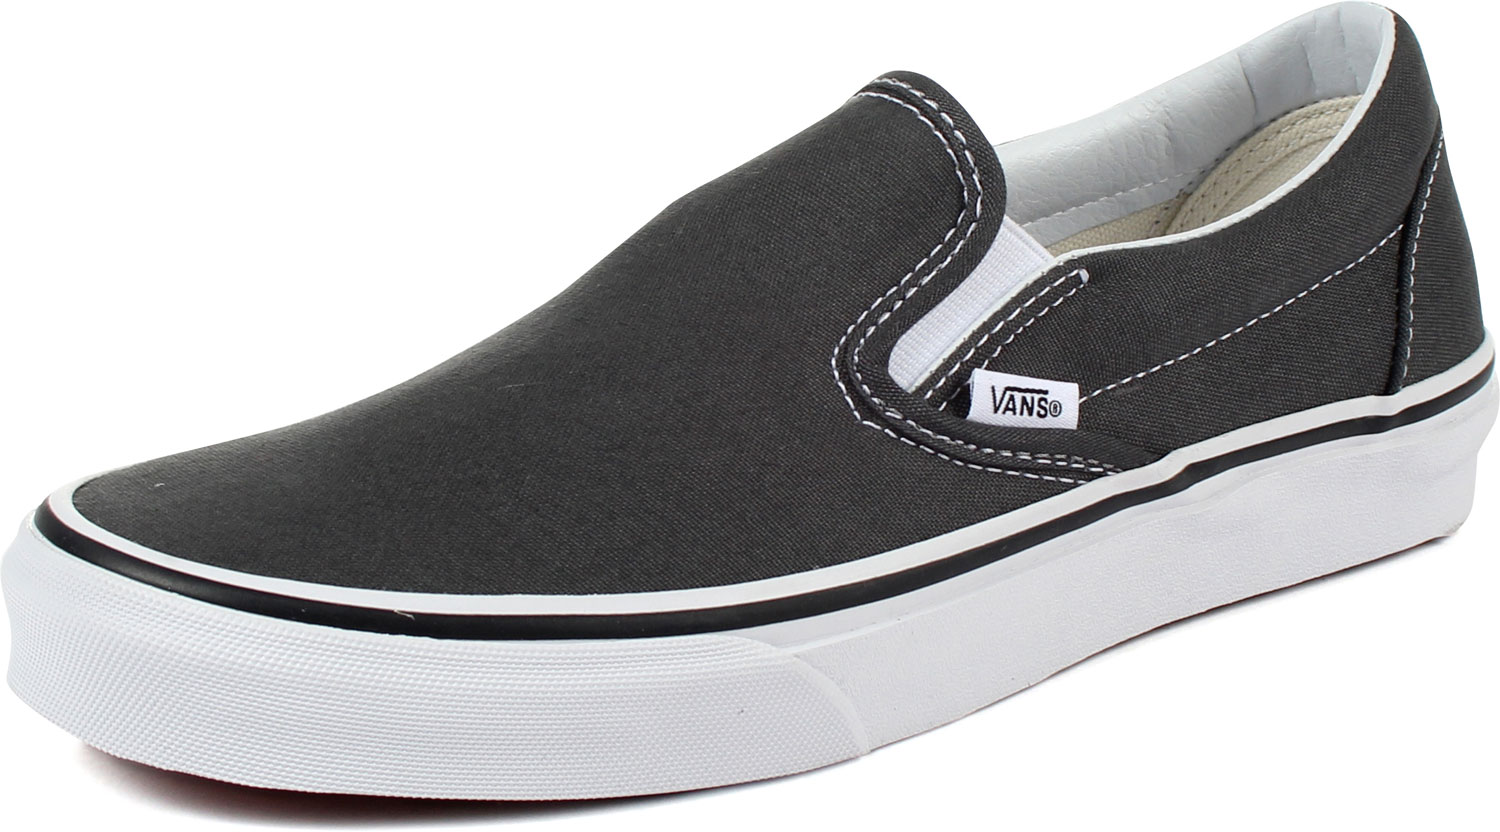 - Unisex Adult Slip-On Shoes In Charcoal